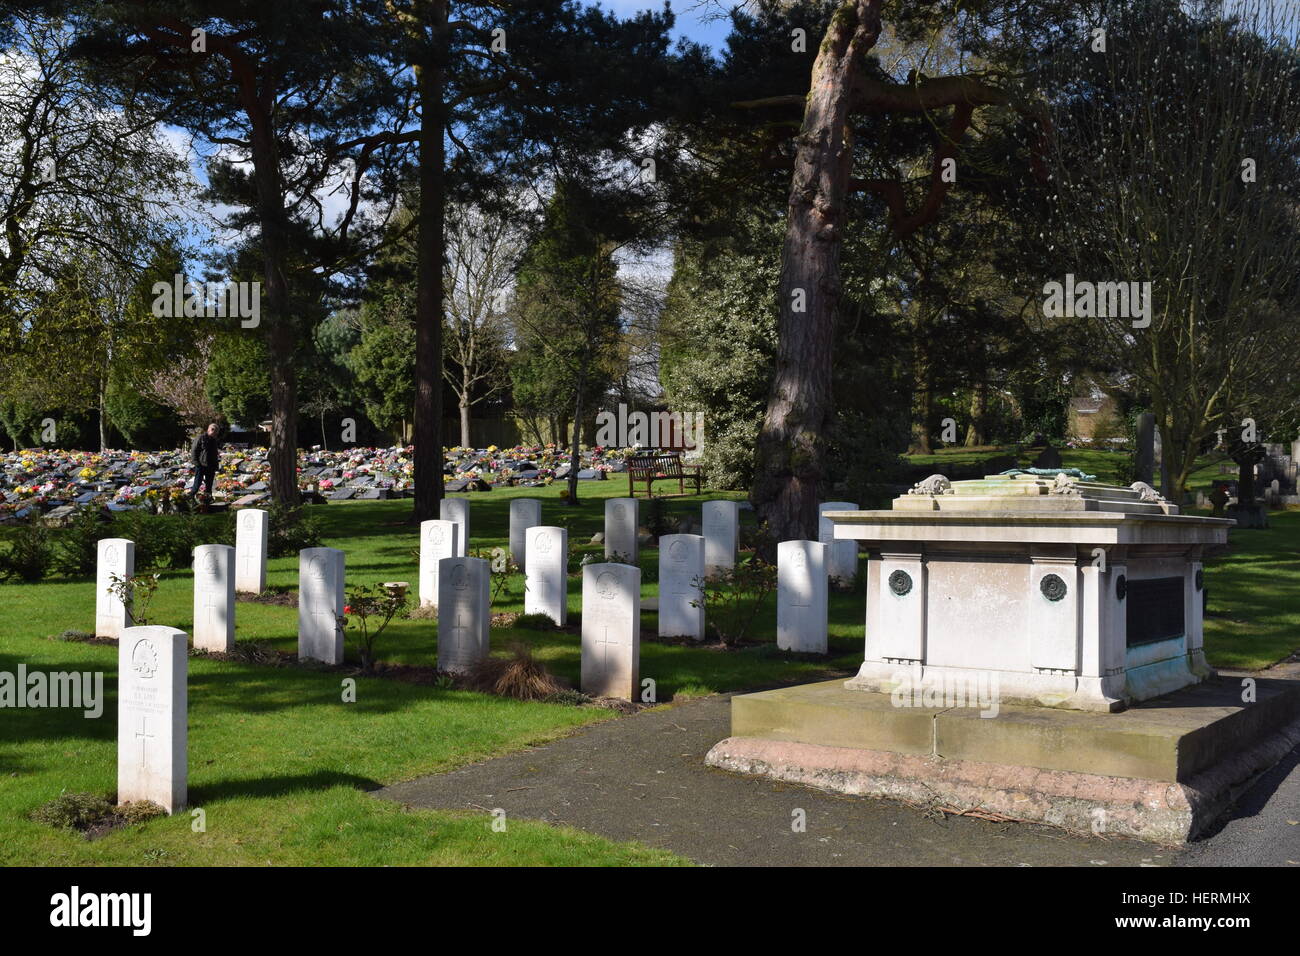 Australian Imperial Force War Graves in Stourbridge Cemetery, England against a wooded/shaded background Stock Photo